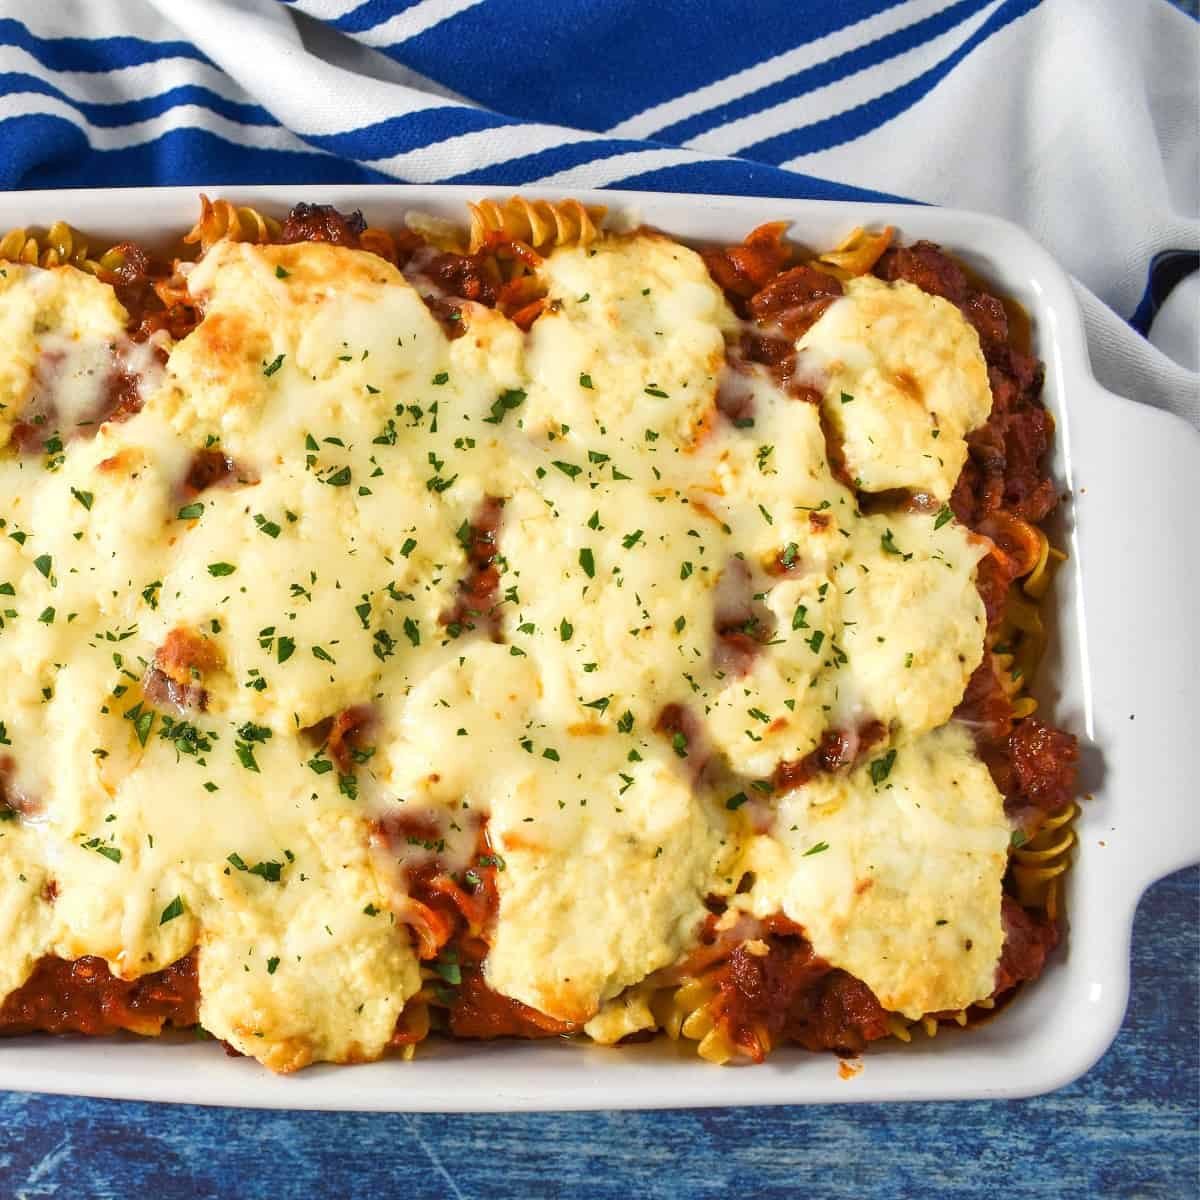 An image of the lasagna casserole in a white baking dish with a blue and white stripe towel.